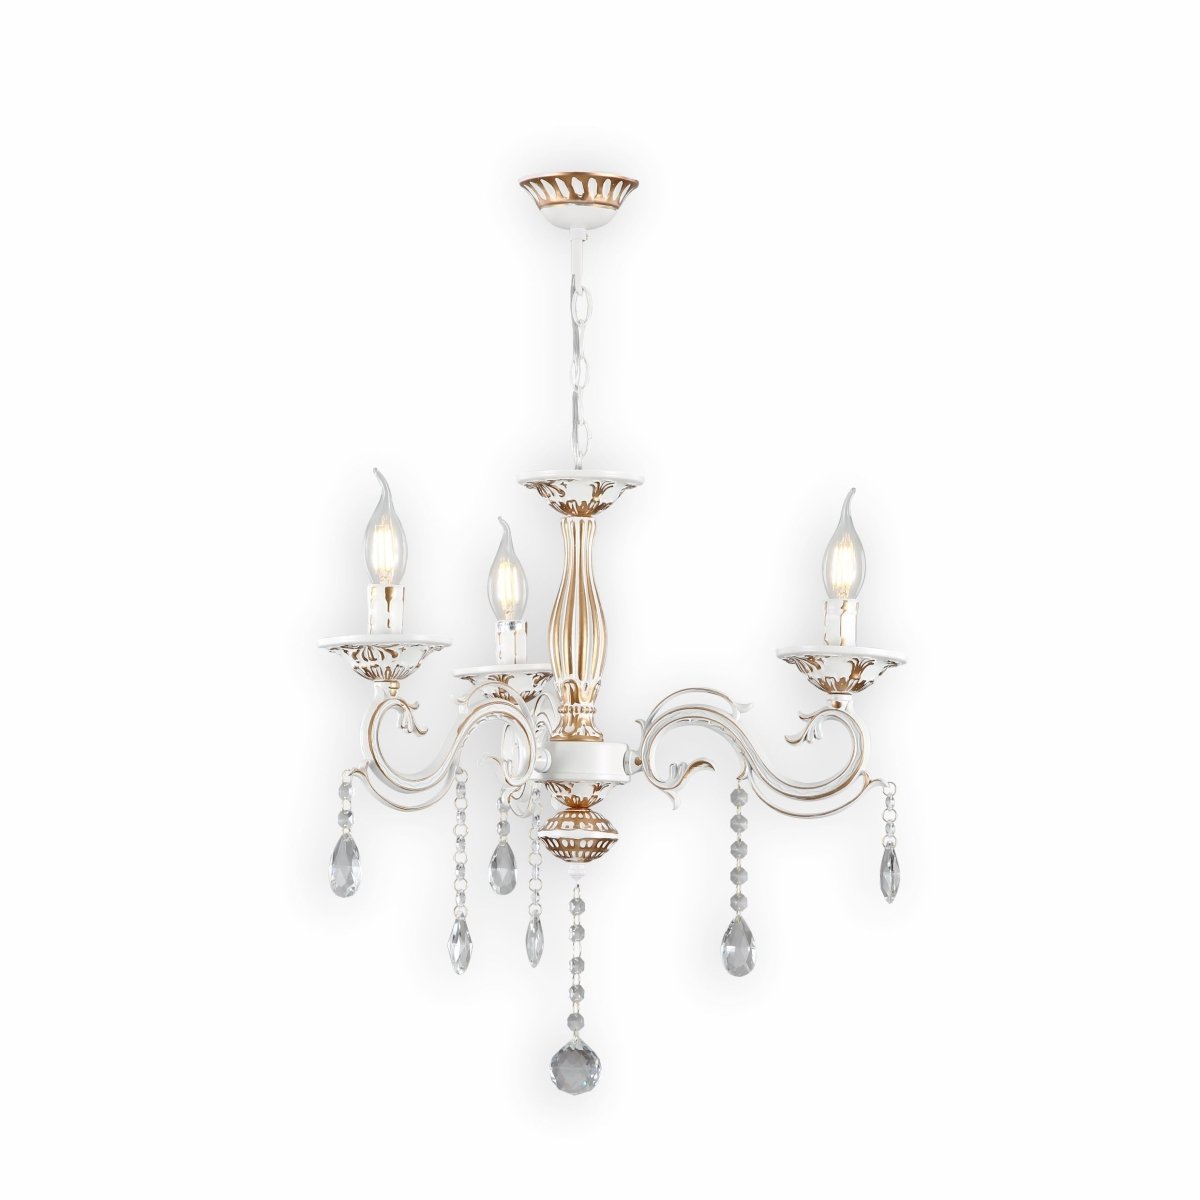 Main image of 3 Arm Chandelier Metal and Crystal Gold Aged Cream 3xE14 | TEKLED 159-17828